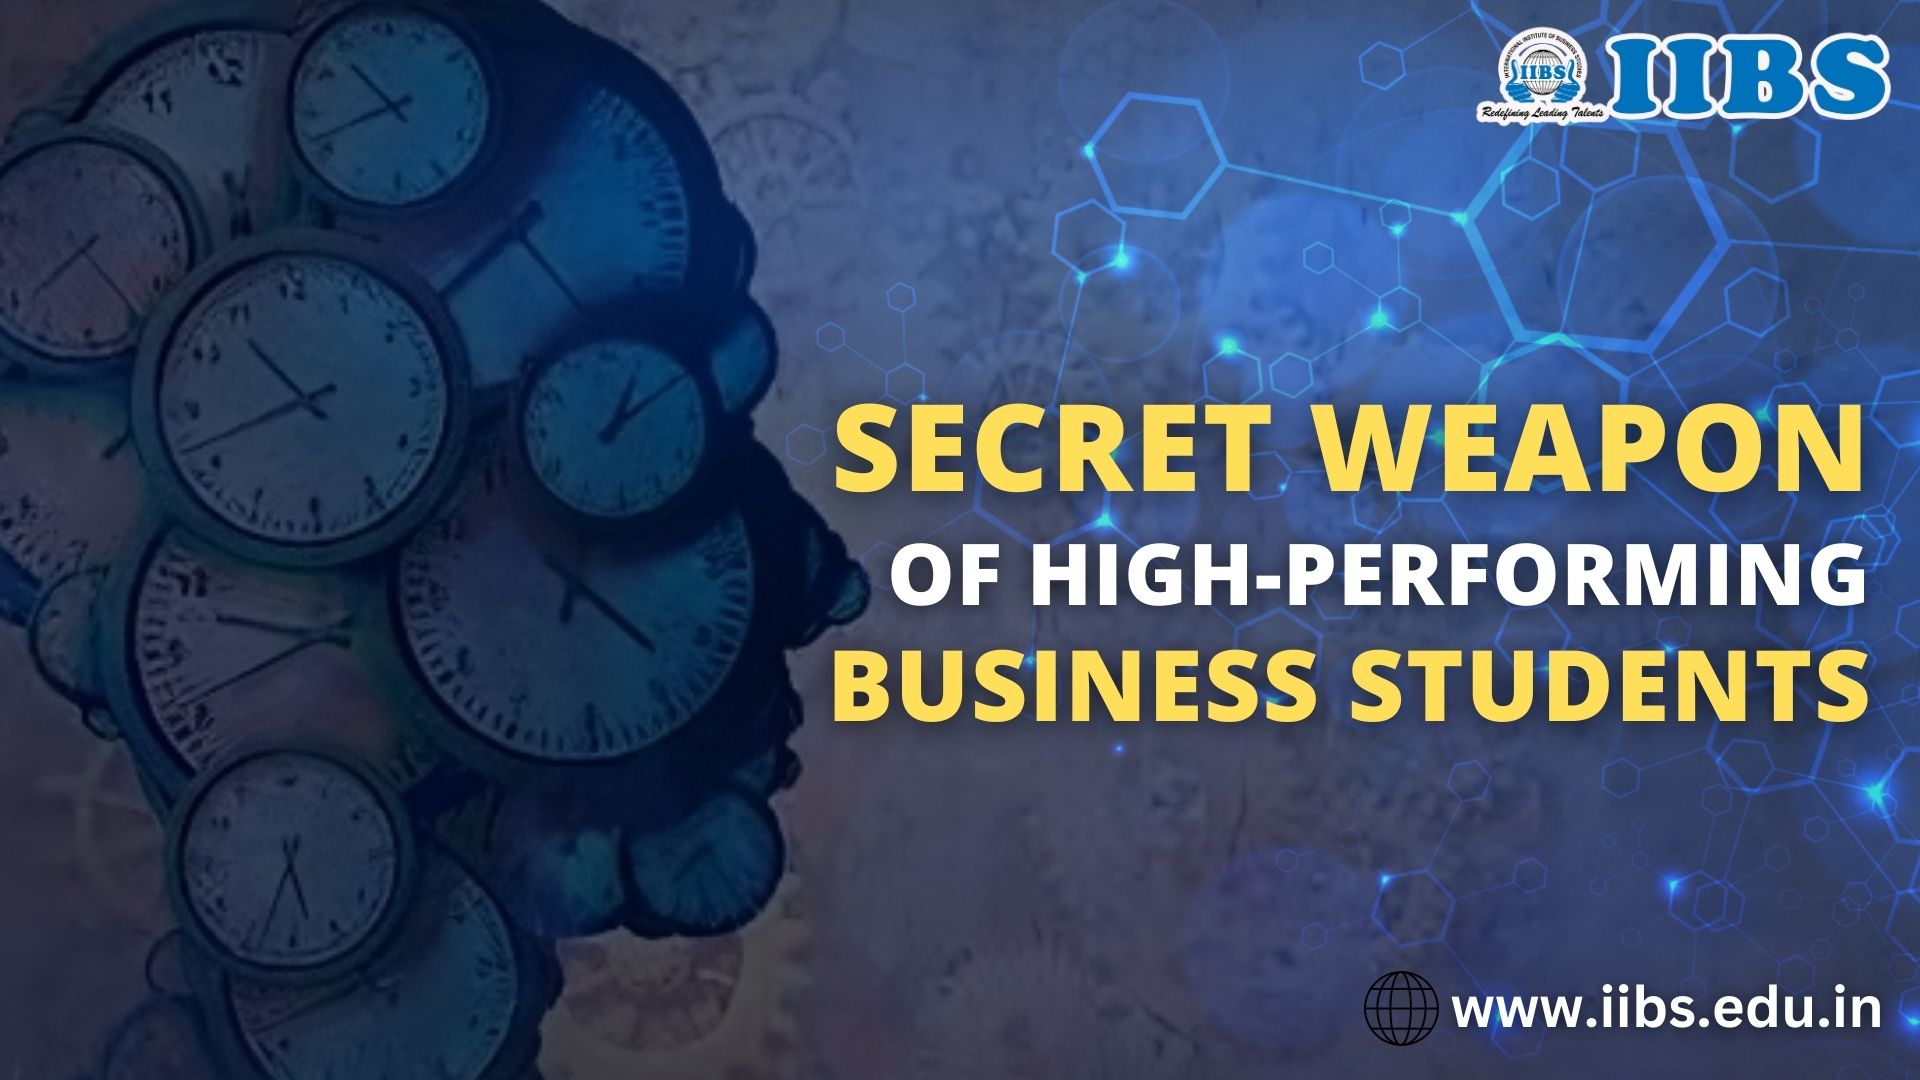 Why Time Management is the Secret Weapon of High-Performing Business Students?